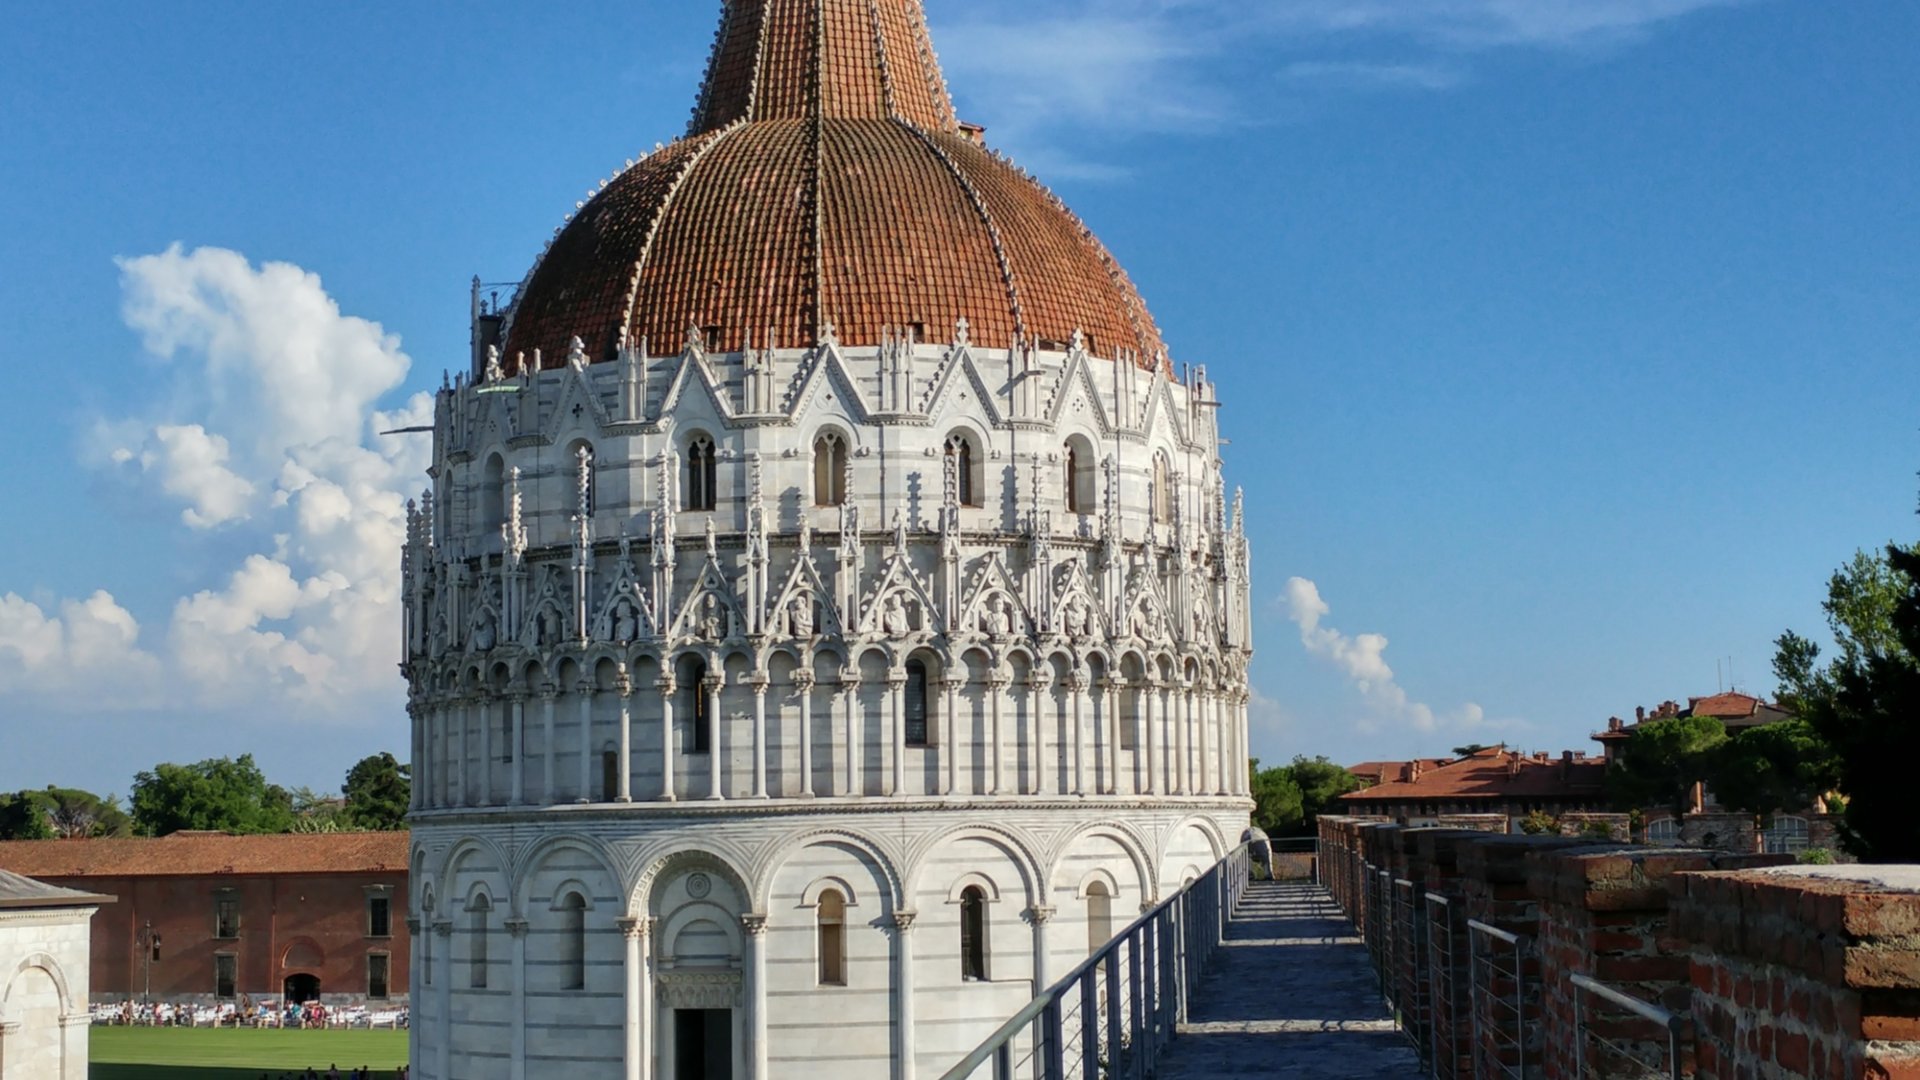 View from the walls of Pisa